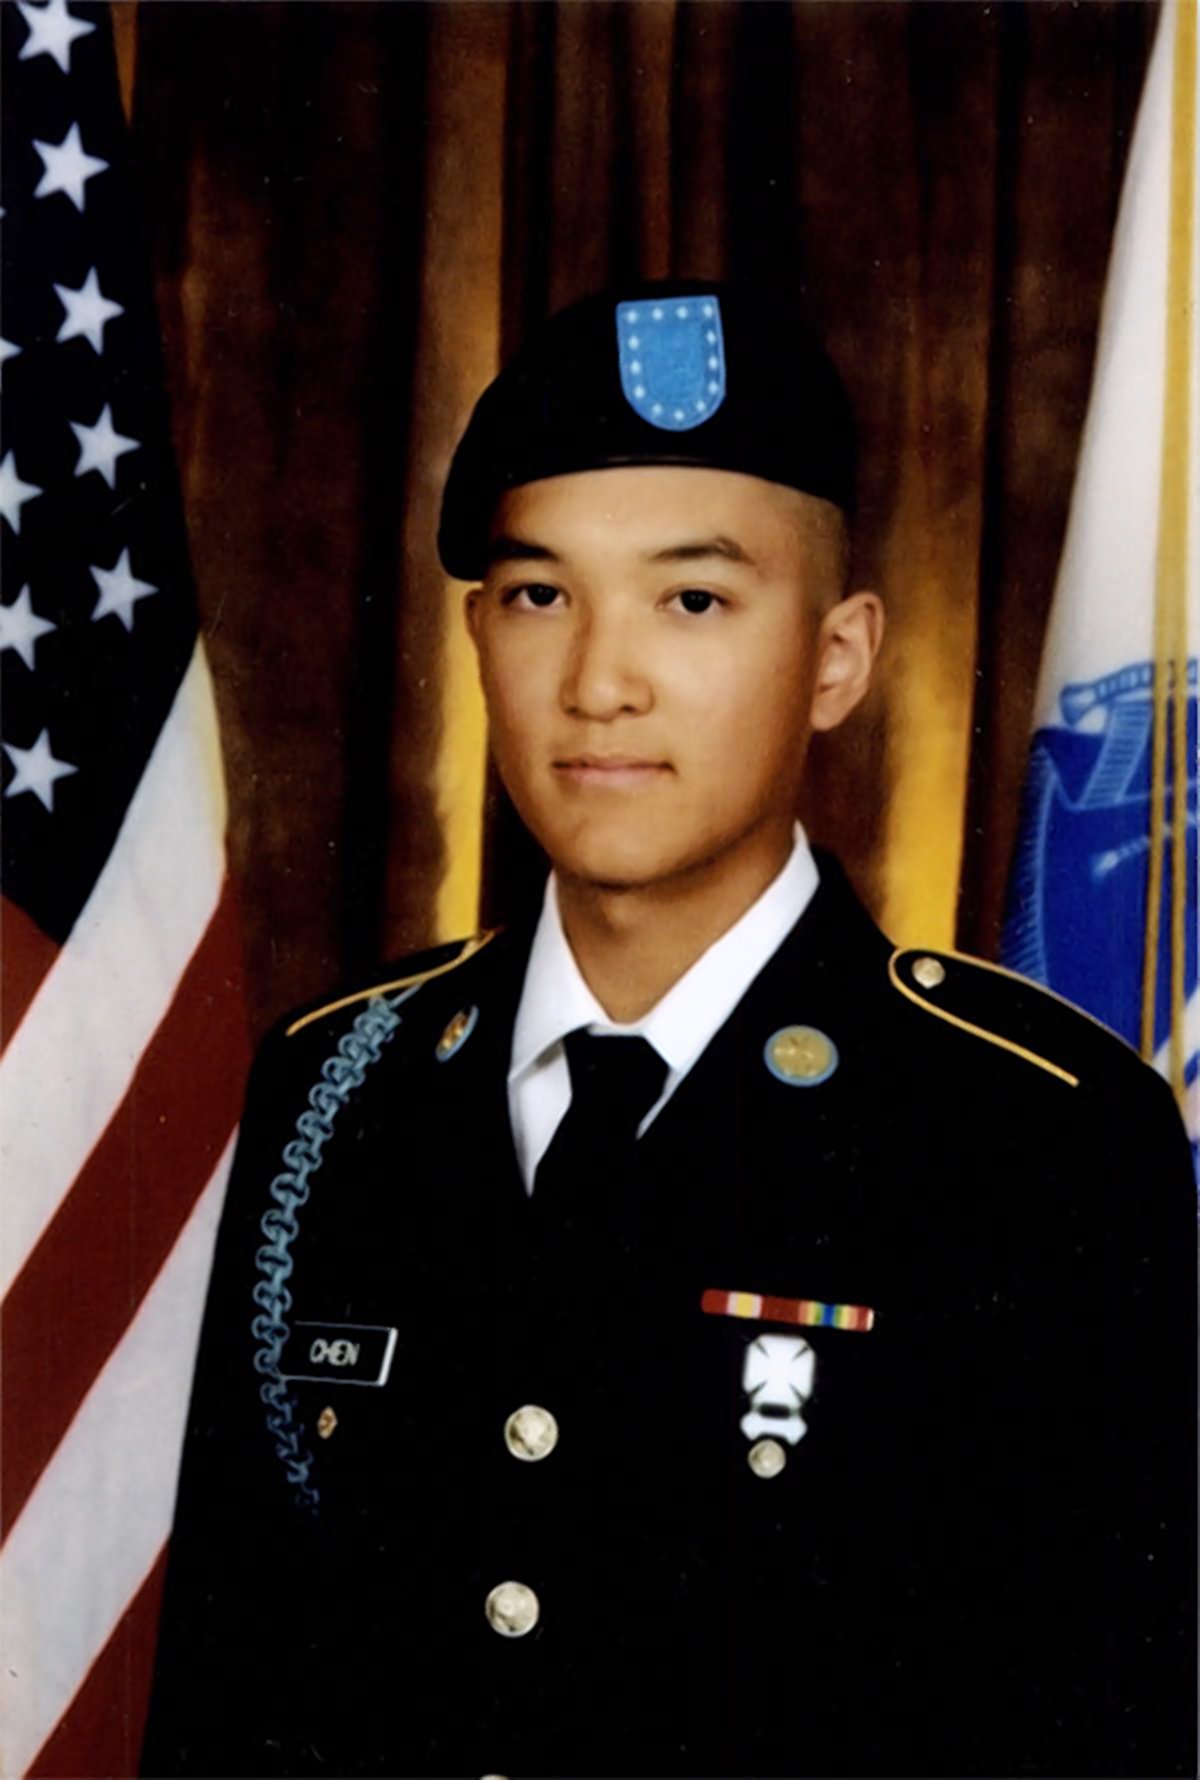 Chen family Pvt. Danny Chen volunteered to serve his country, but his fellow soldiers' bullying drove him to suicide in 2011.